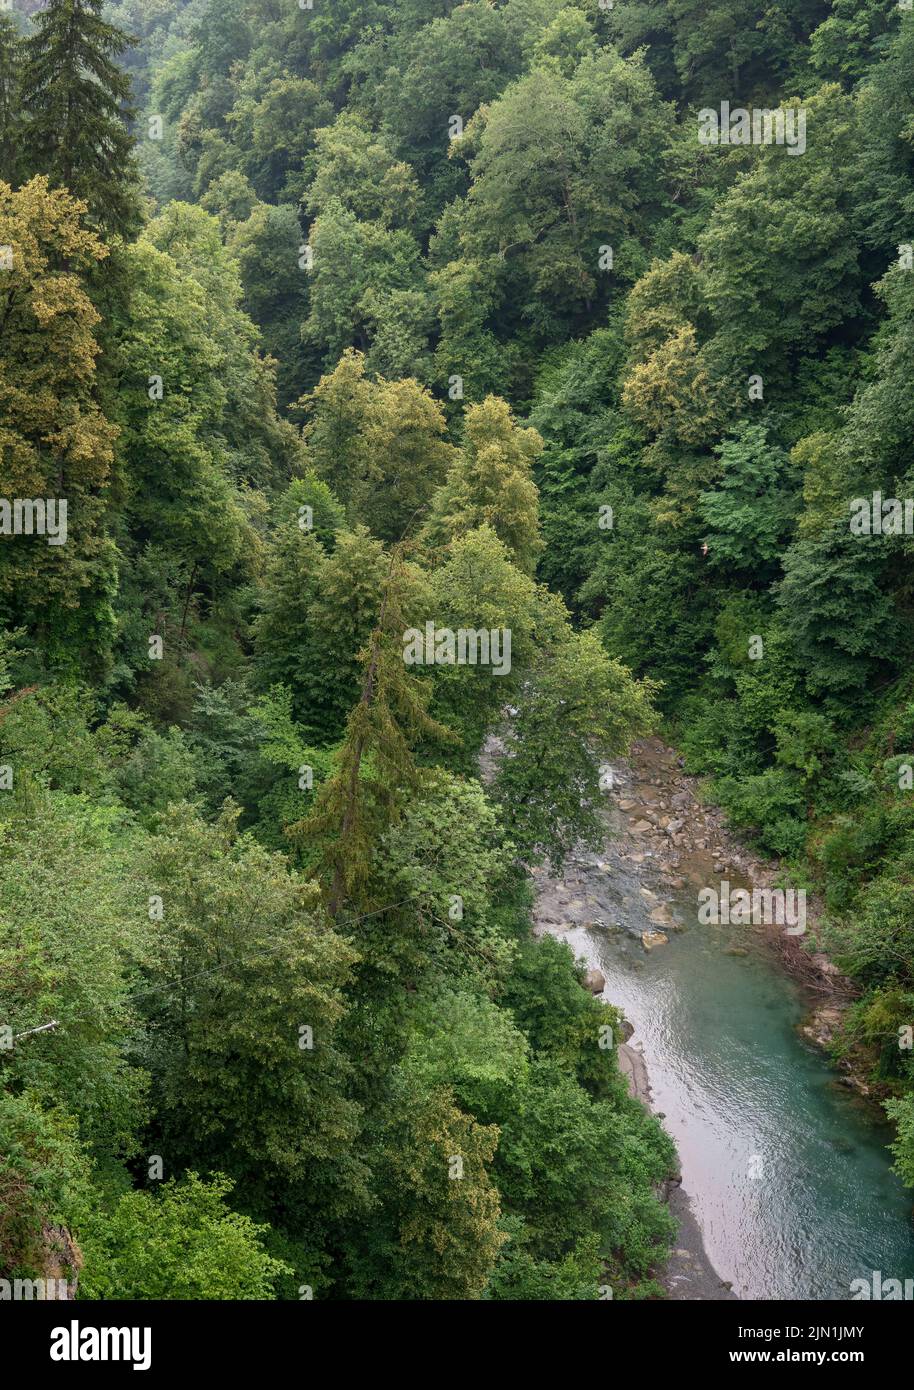 a forested mountain gorge with river running through Stock Photo